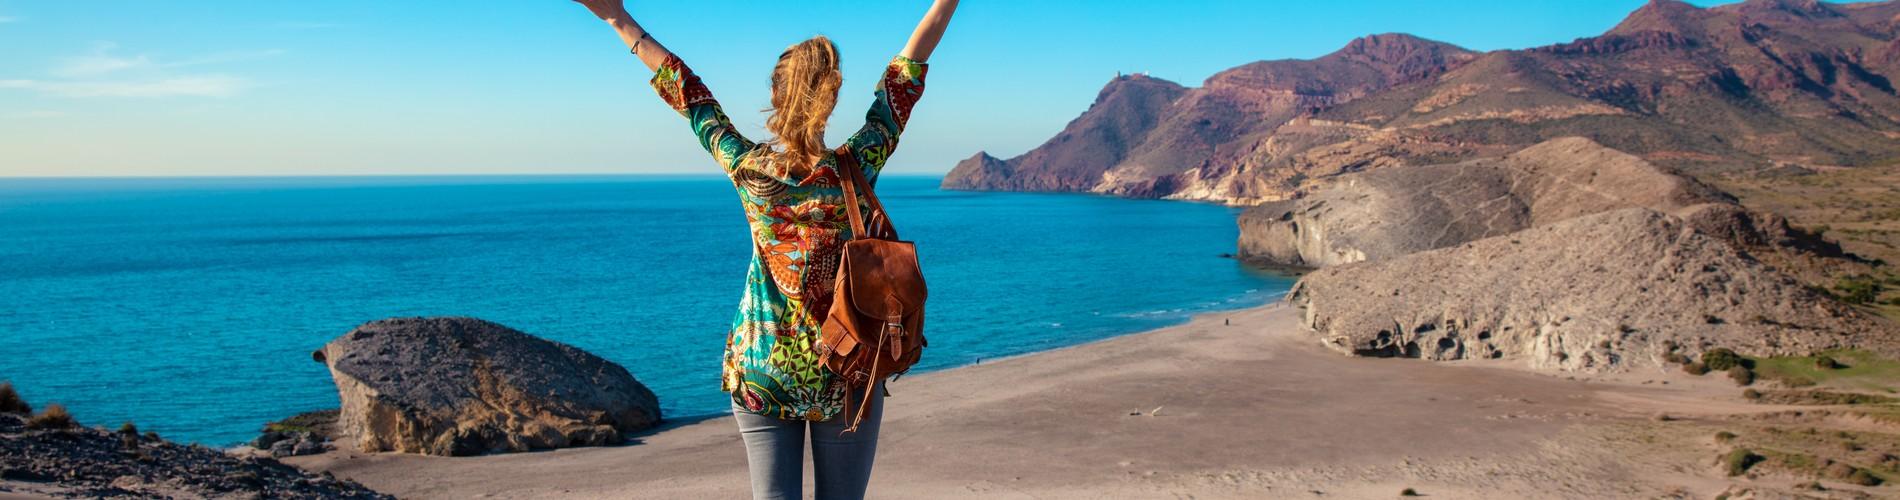 Is It Safe for Women to Travel Alone in Peru?